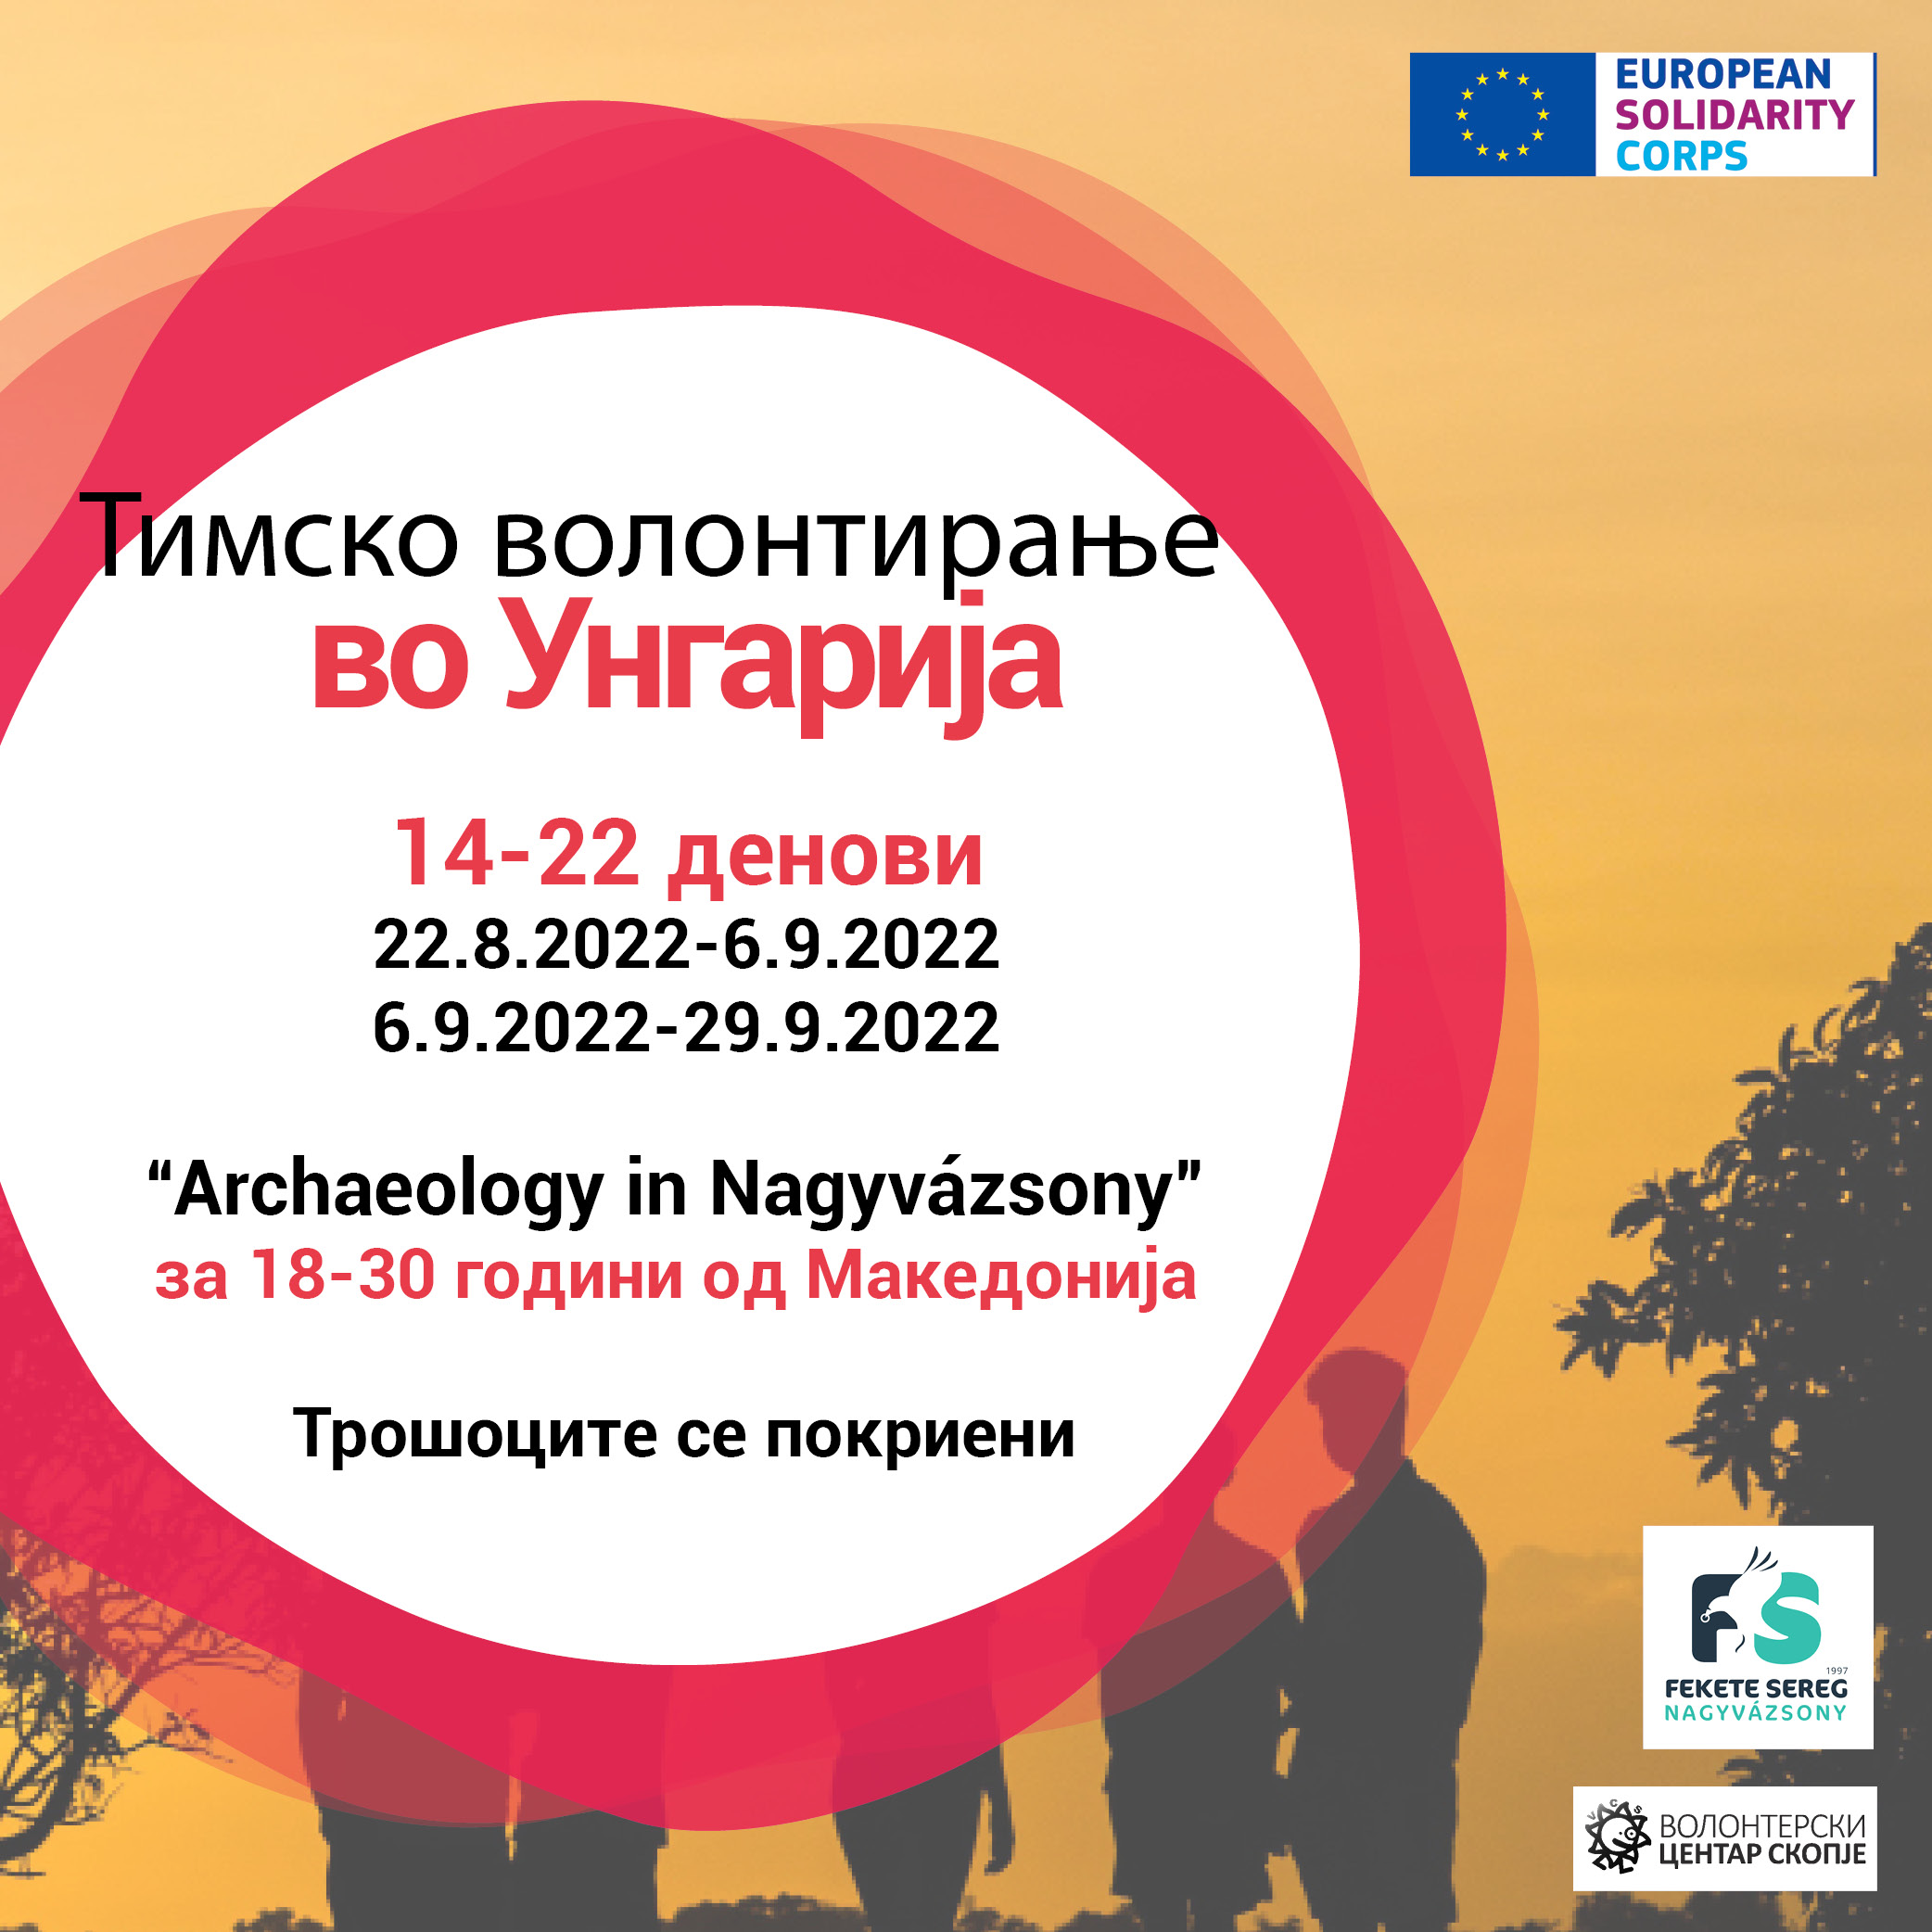 You are currently viewing Call for volunteers in Hungary!